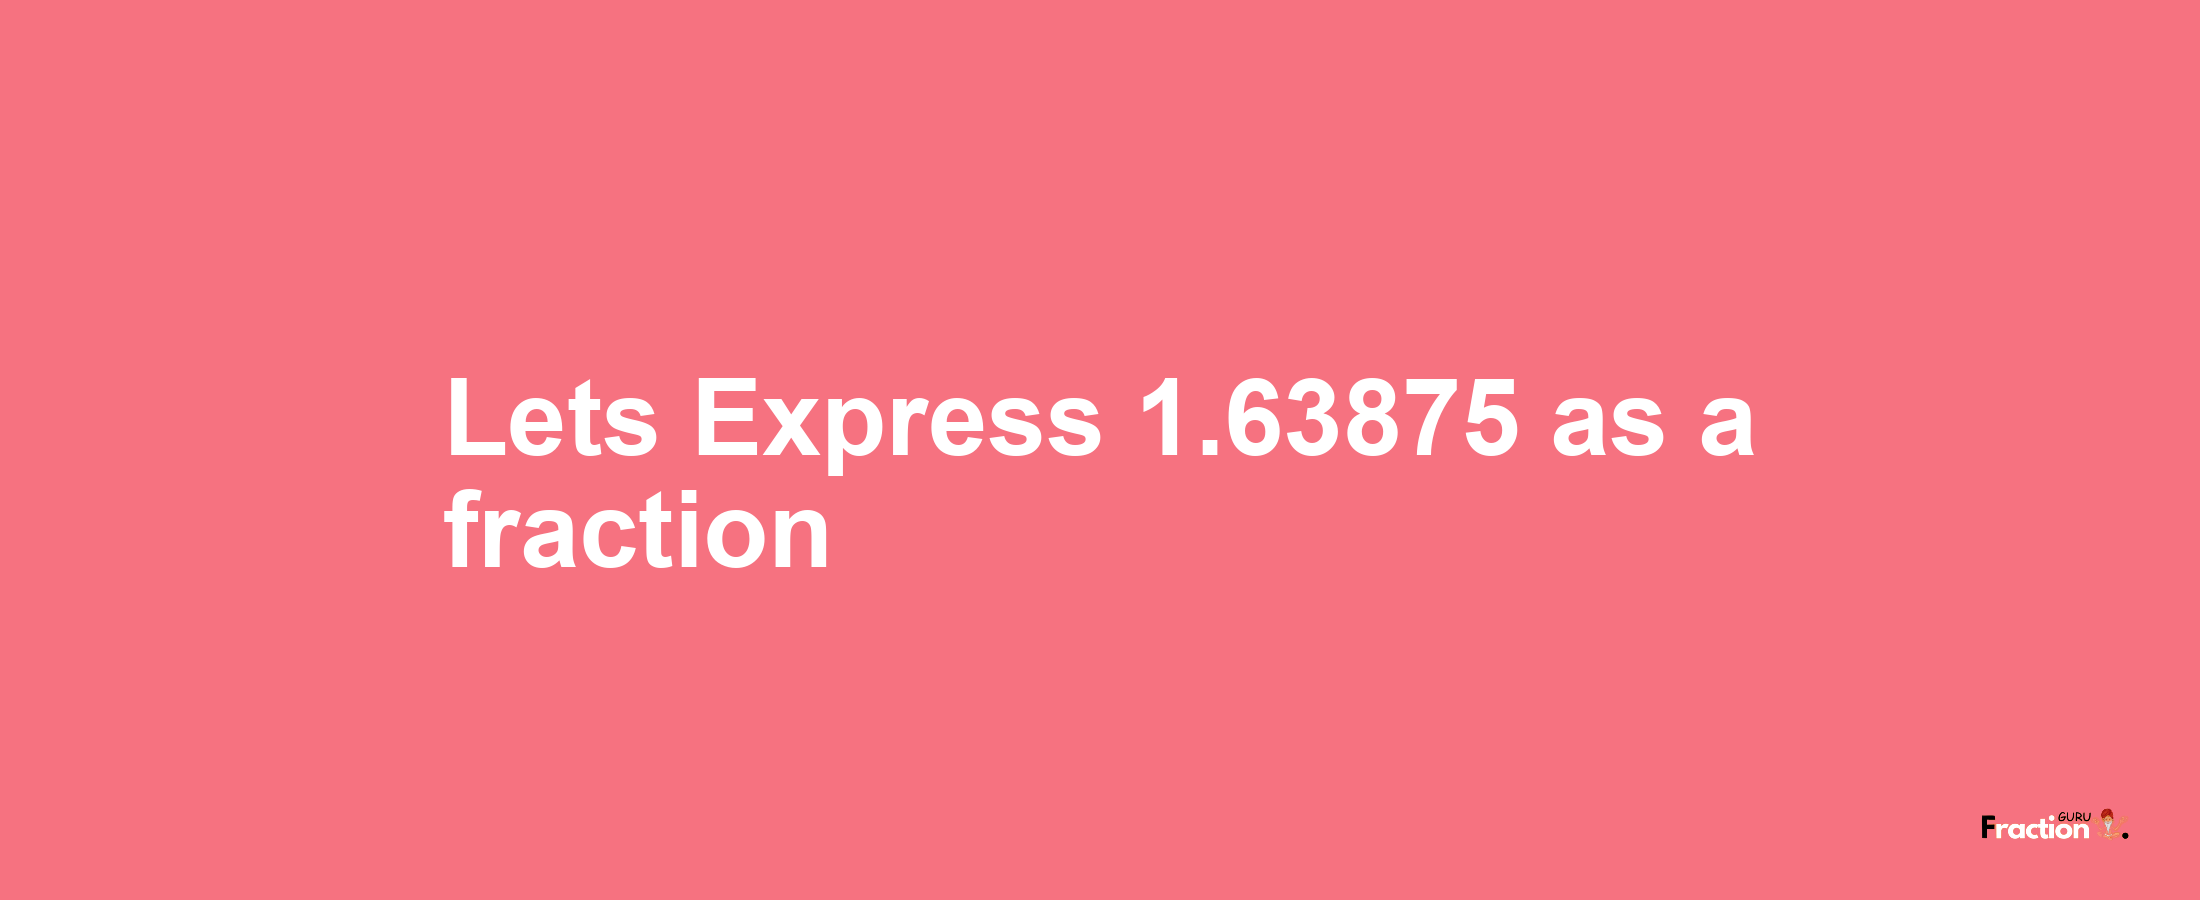 Lets Express 1.63875 as afraction